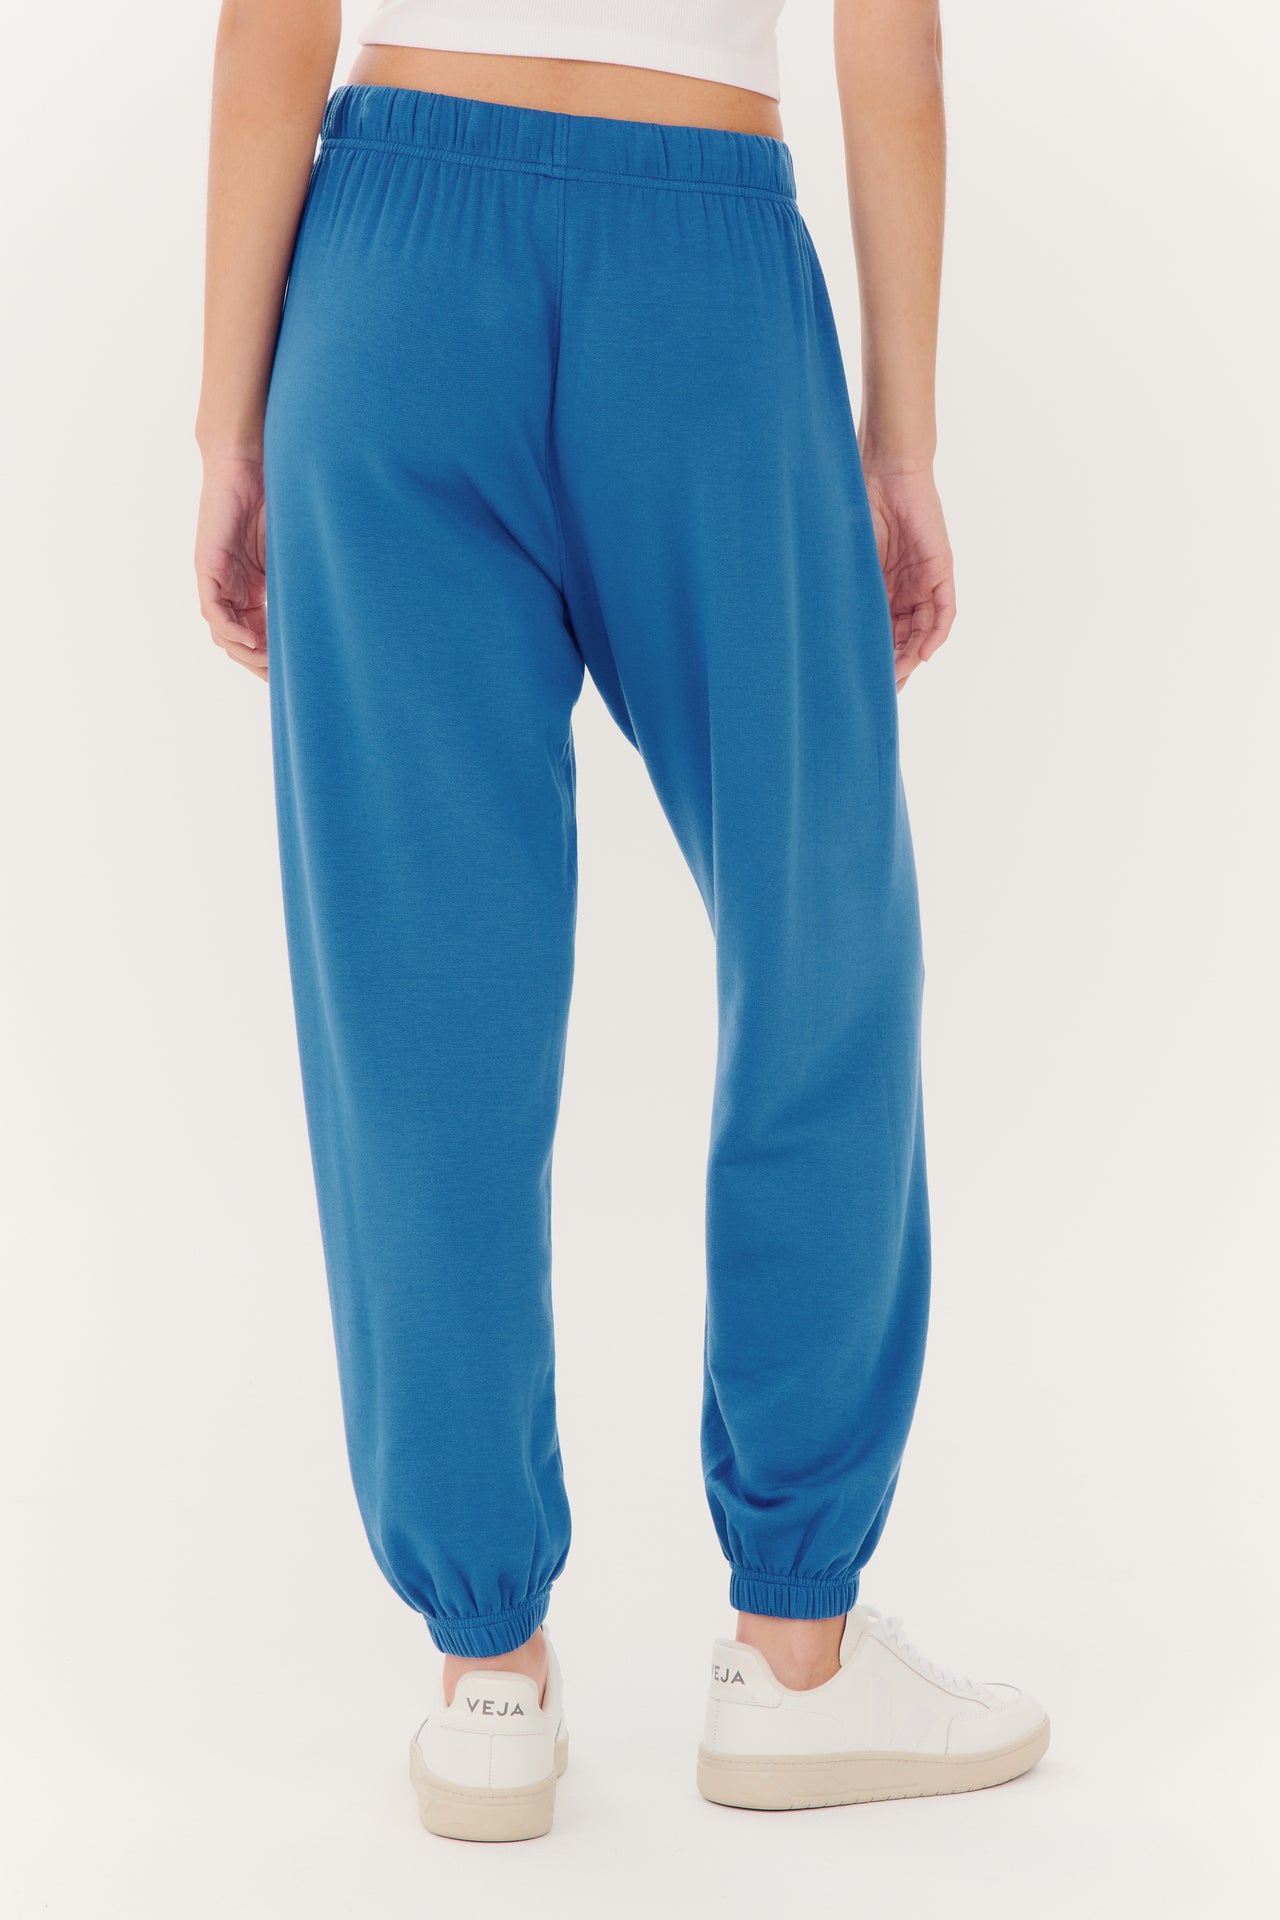 A person standing, showcasing SPLITS59 Andie Oversized Fleece Sweatpant - Stone Blue made of modal fabric and white sneakers.